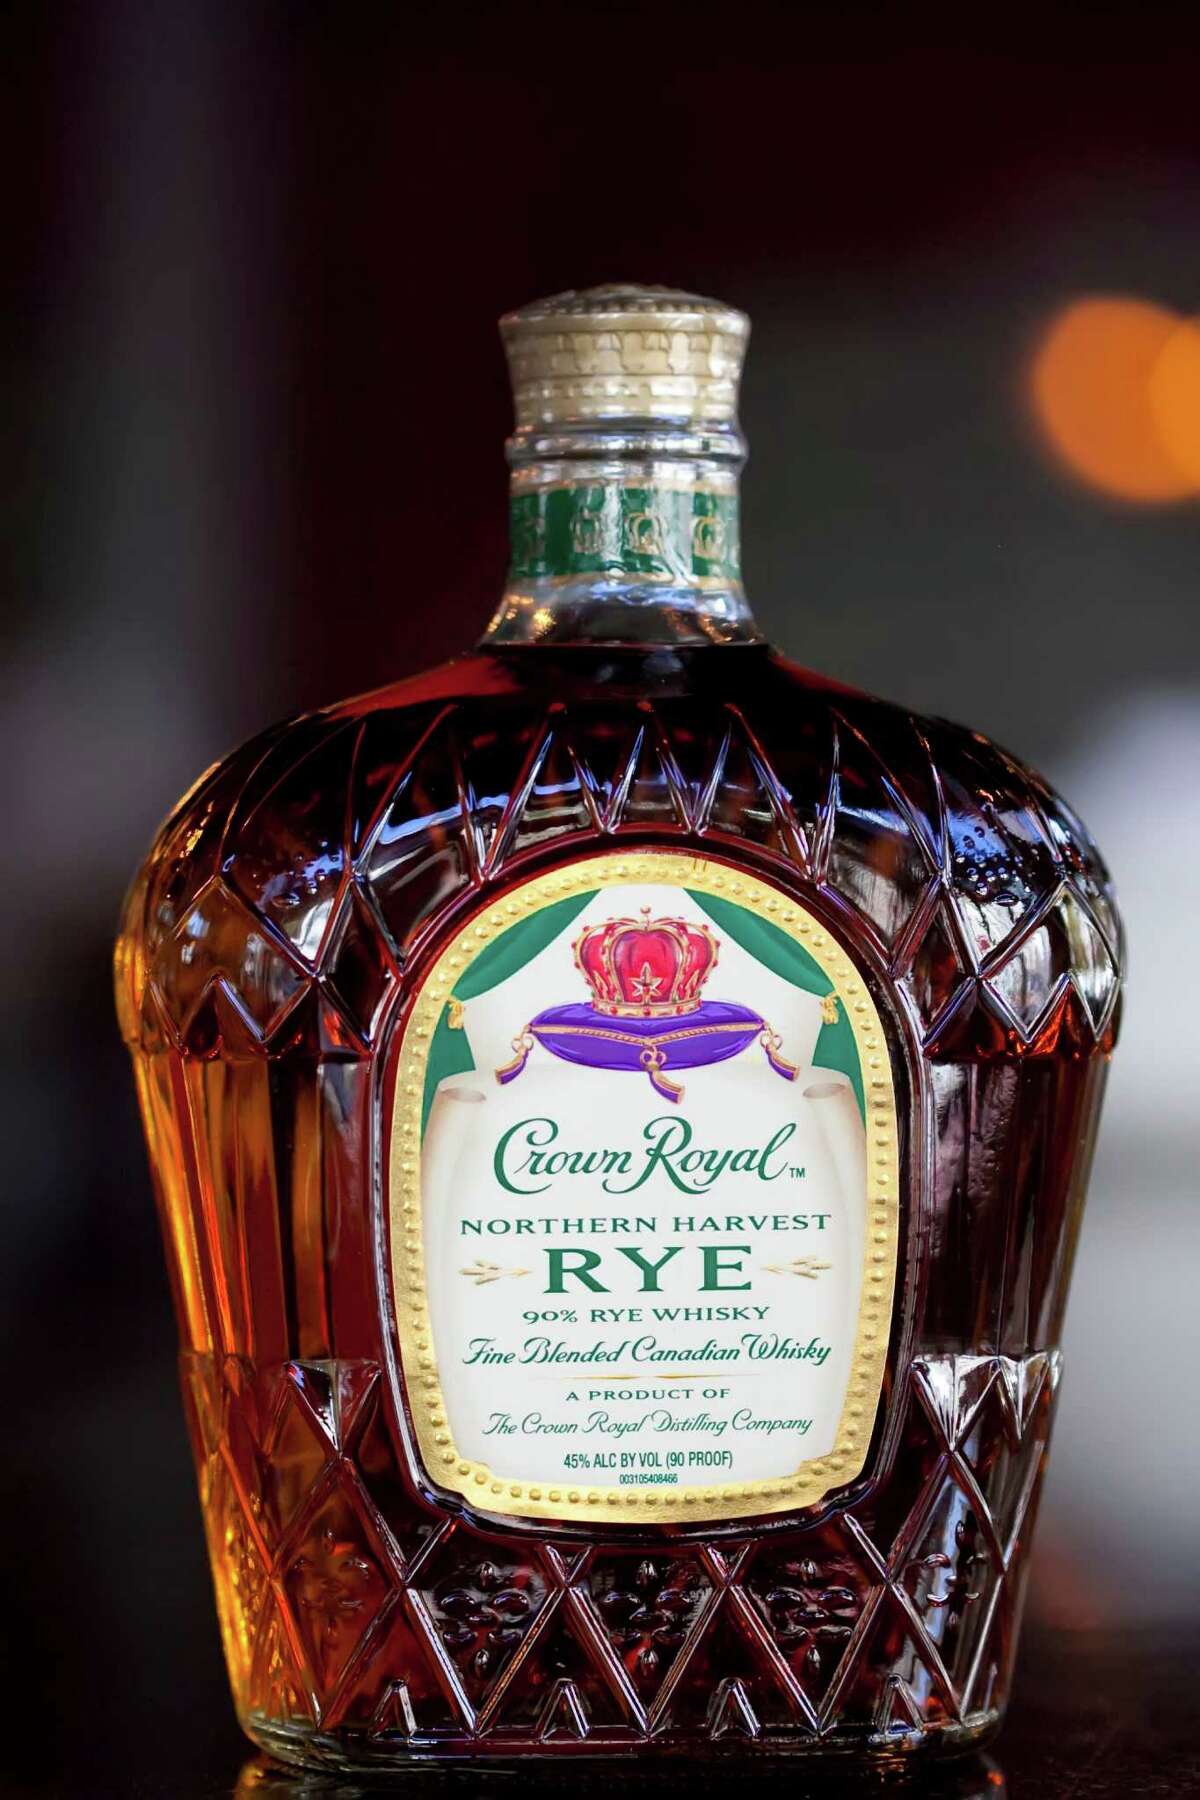 Crown Royal has launched Crown Royal Northern Harvest Rye, its first ever rye whiskey. Copyright 2015 STP Images, Inc.